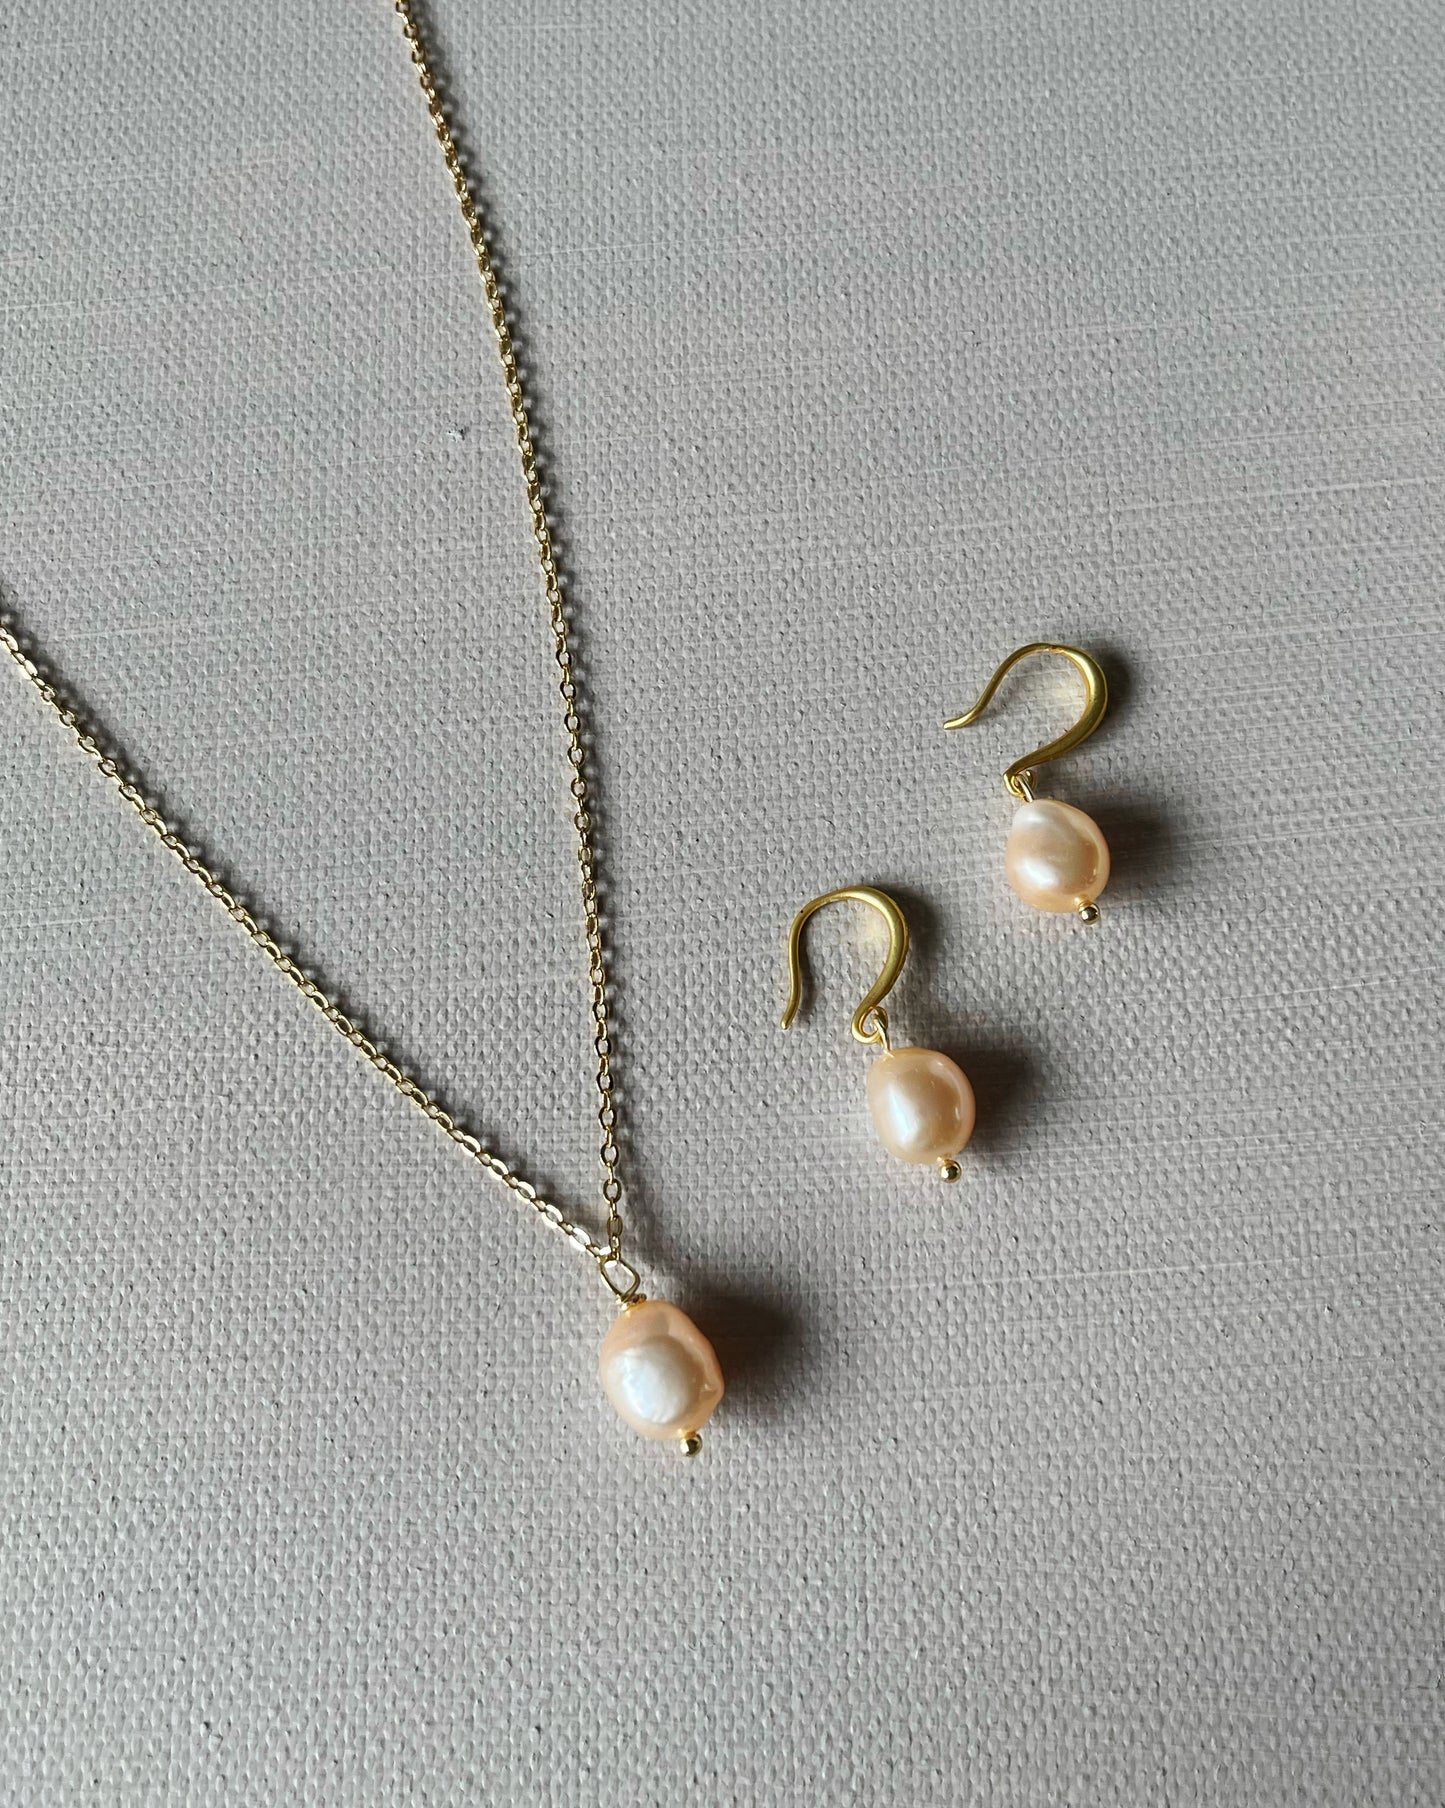 My first baroque pearl necklace and earring set in peachy pink